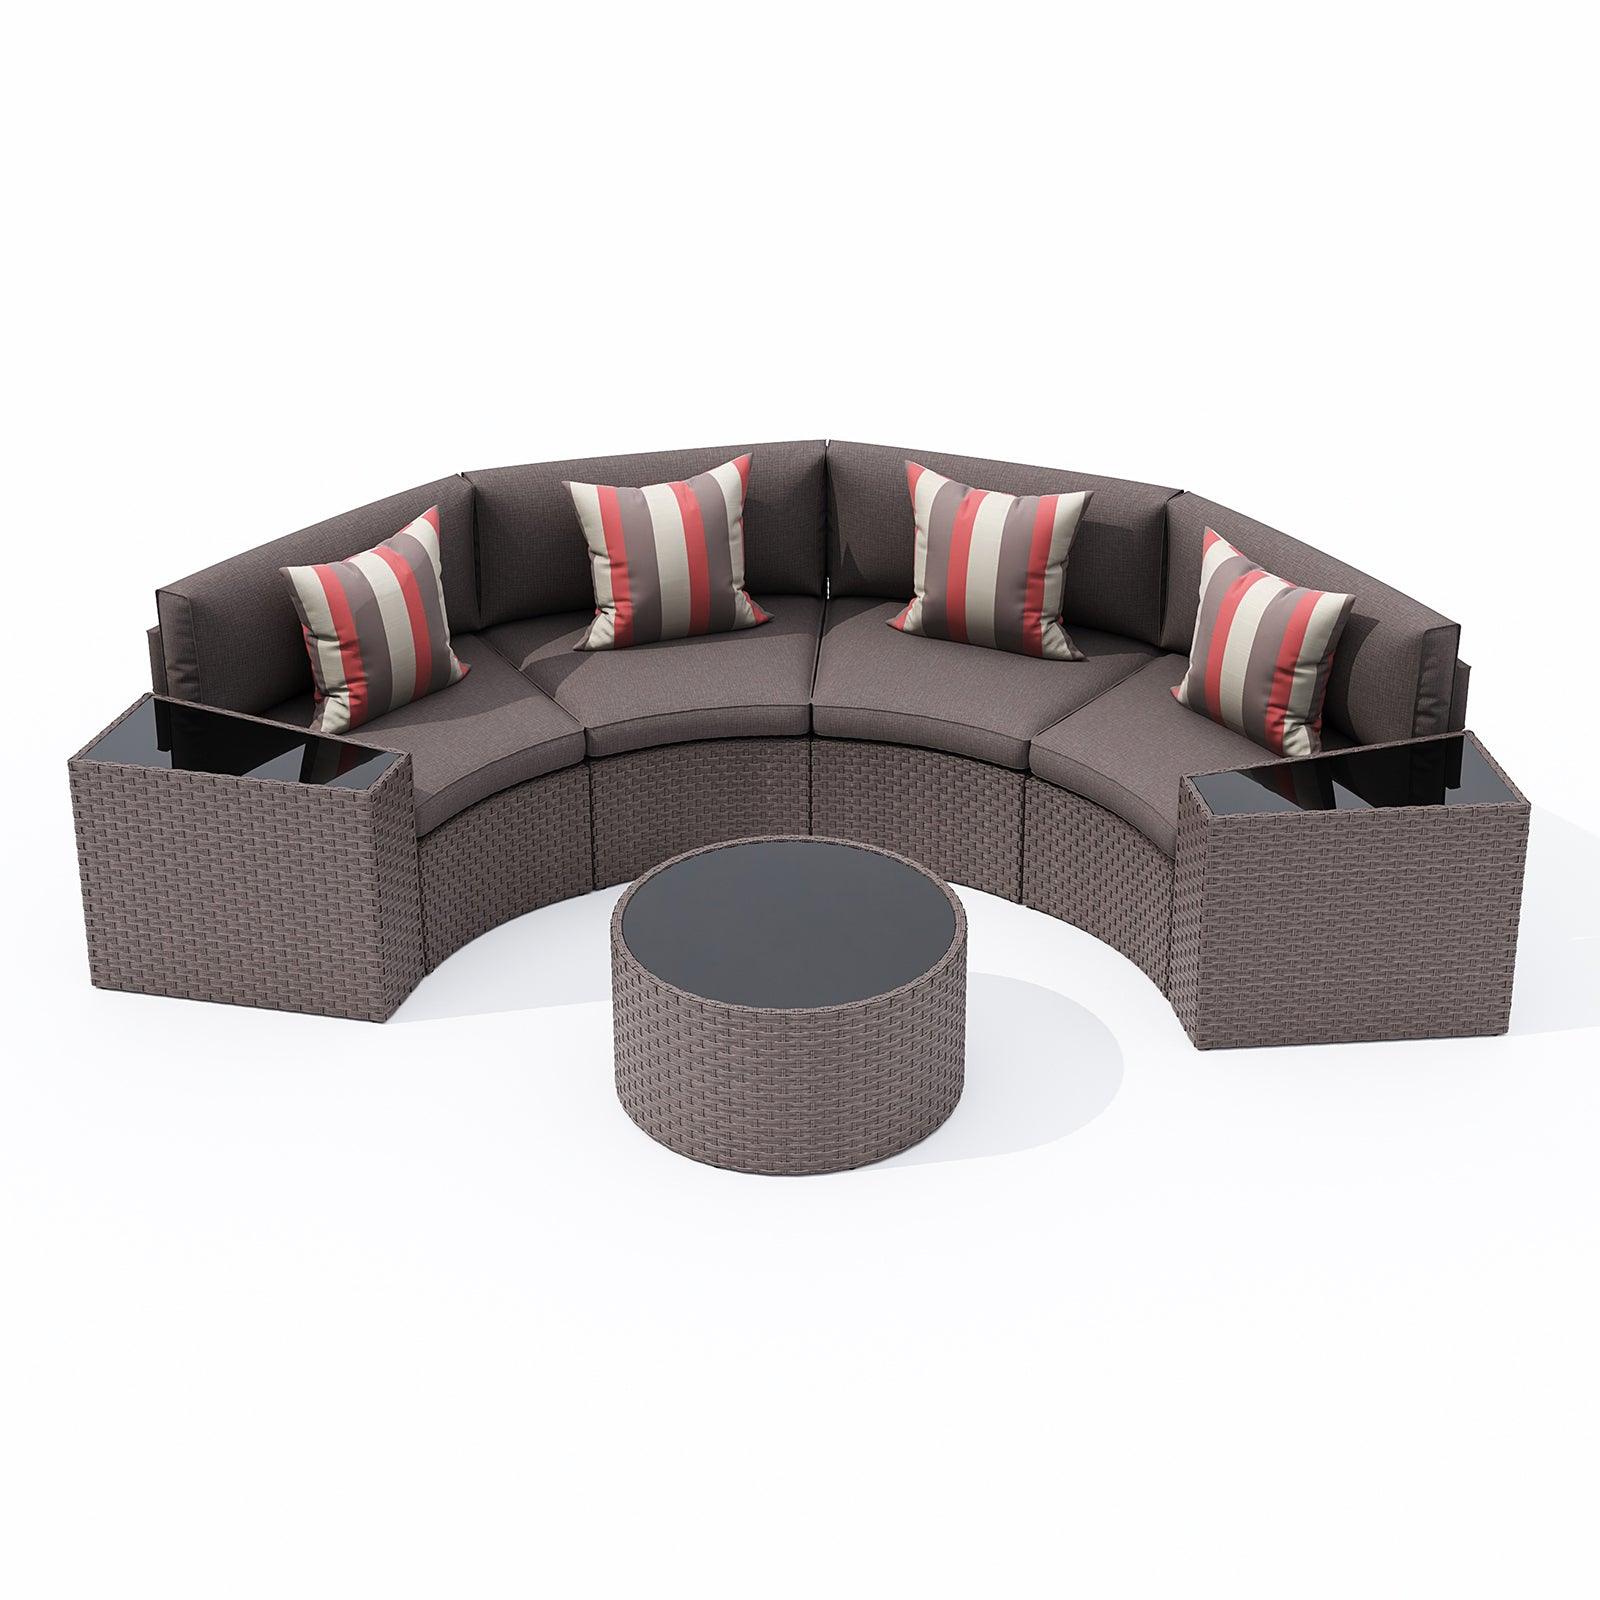 Halo II 7-pc. Outdoor Half-Moon Sectional Set, Taupe sale 